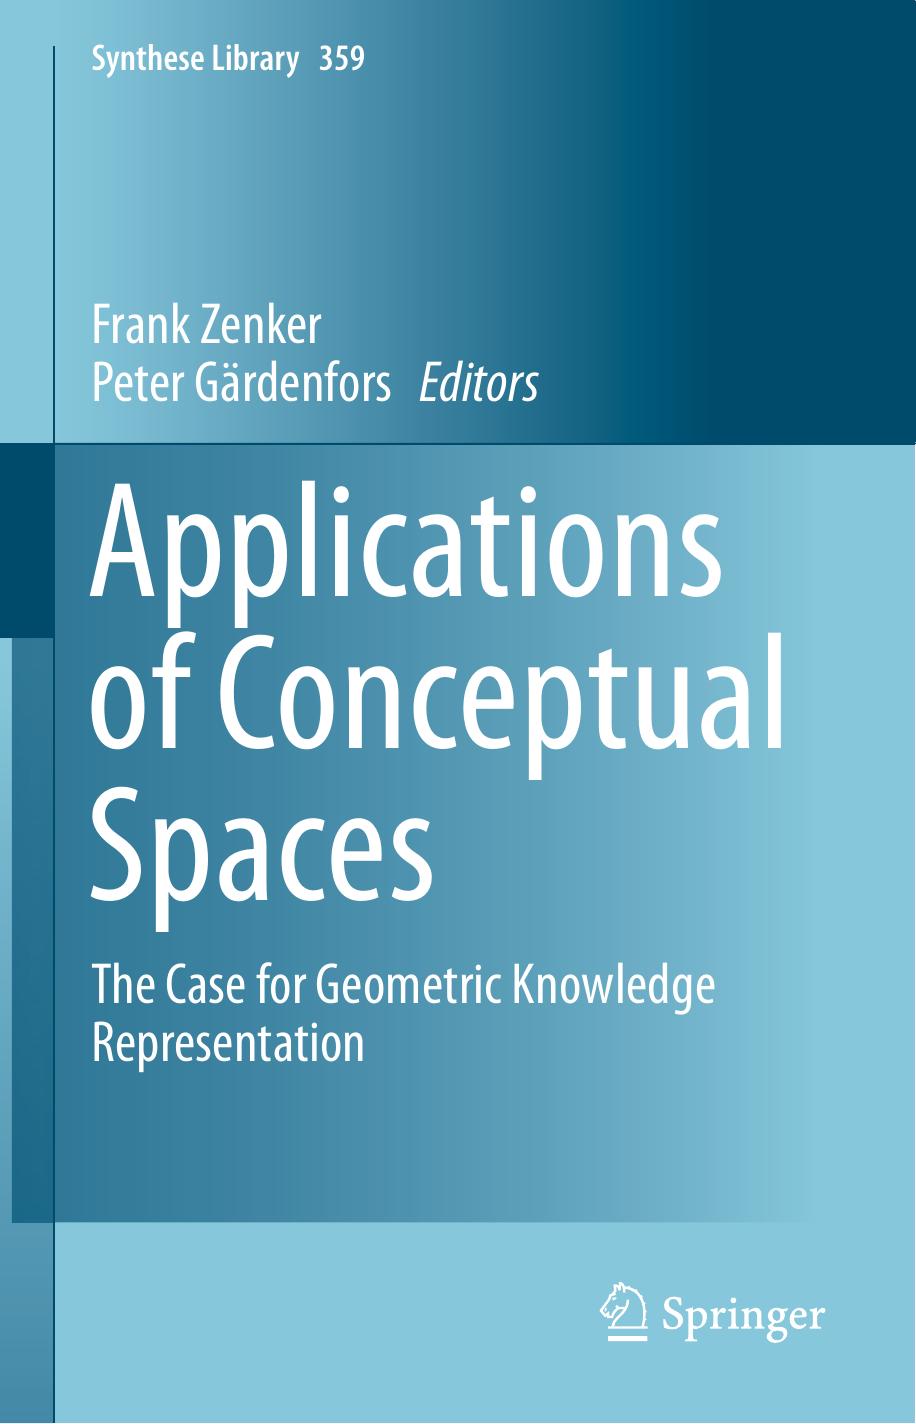 Applications of Conceptual Spaces: The Case for Geometric Knowledge Representation